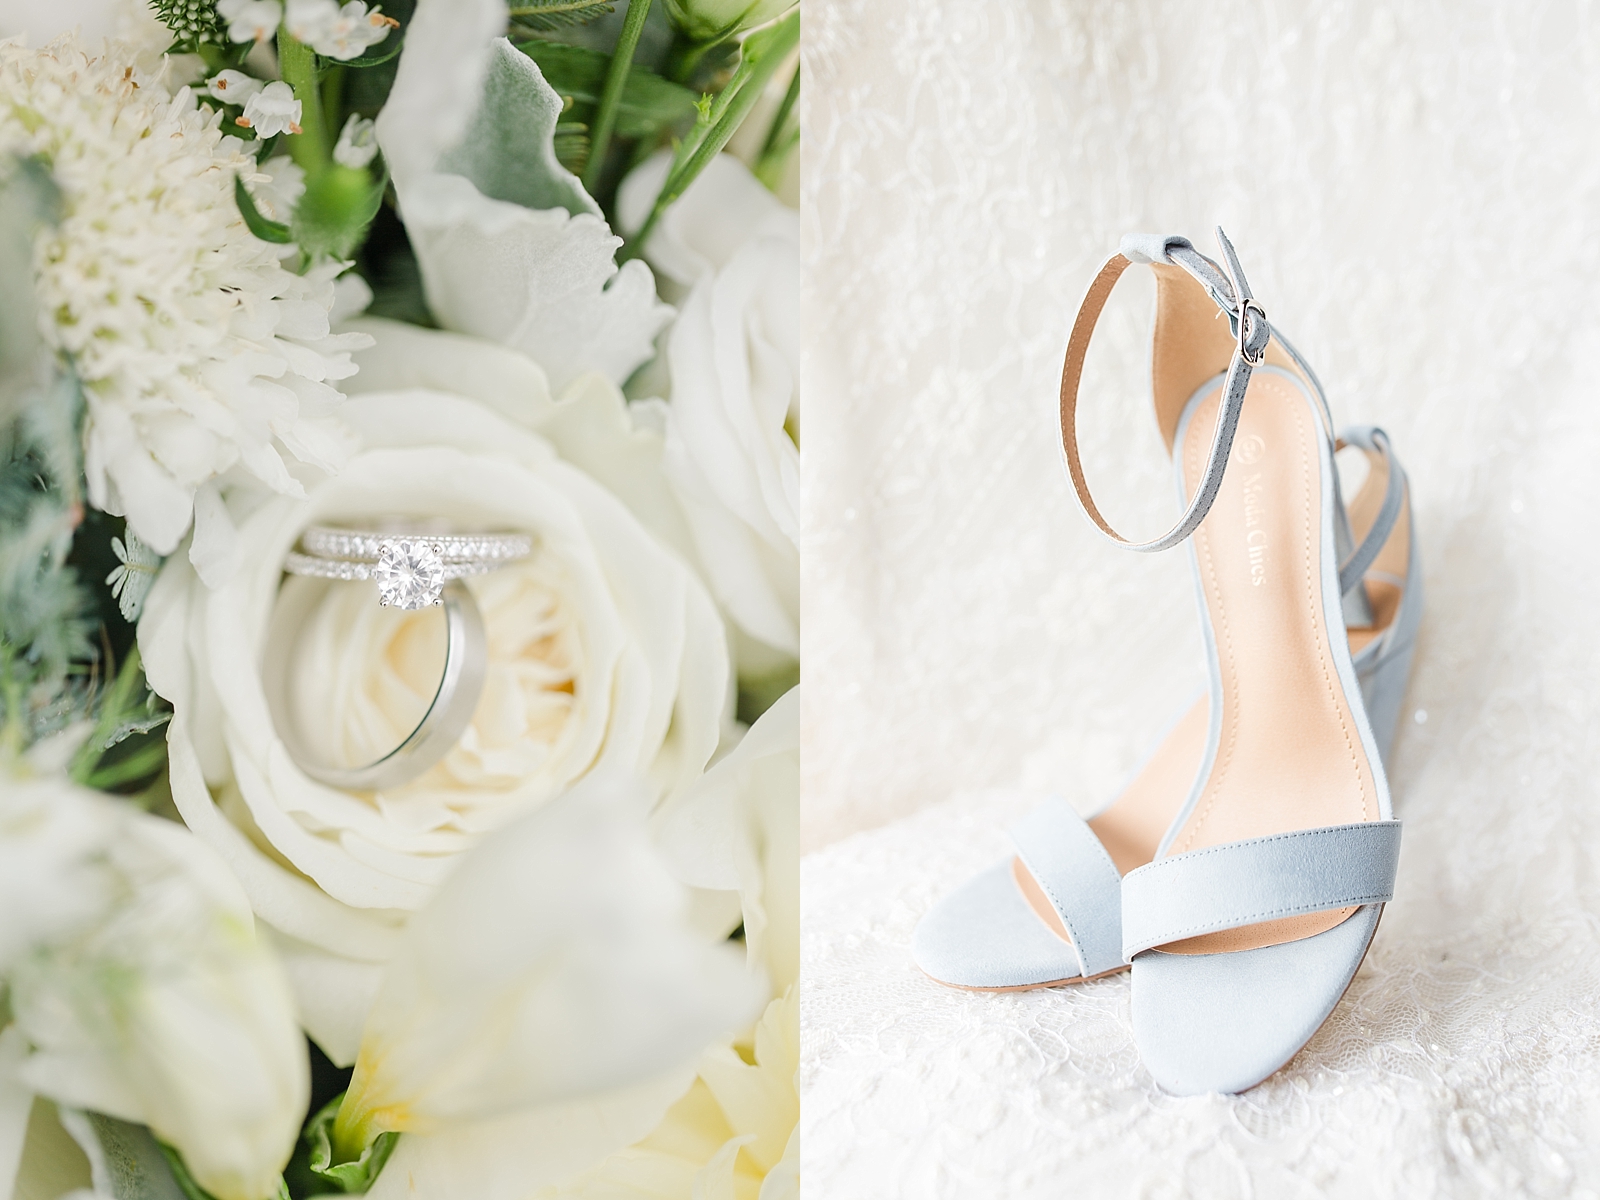 Magnolia Plantation Wedding Ring in Flowers Detail and Bridal Shoes Photos